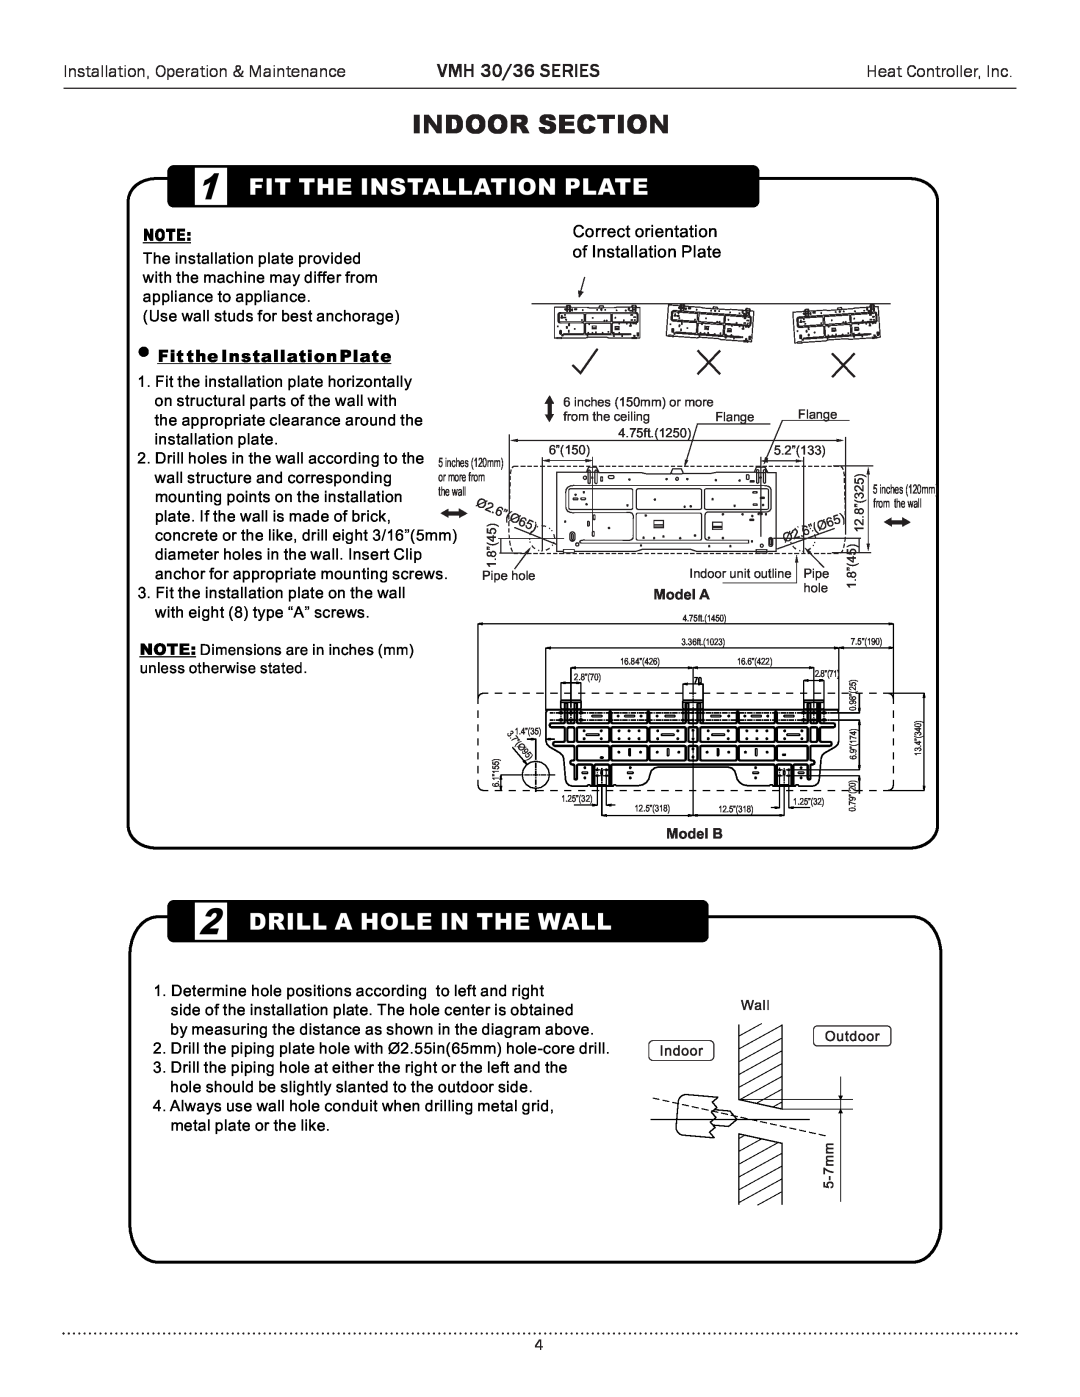 Heat Controller manual Indoor Section, 2DRILL A HOLE IN THE WALL, 1FIT THE INSTALLATION PLATE, VMH 30/36 SERIES 